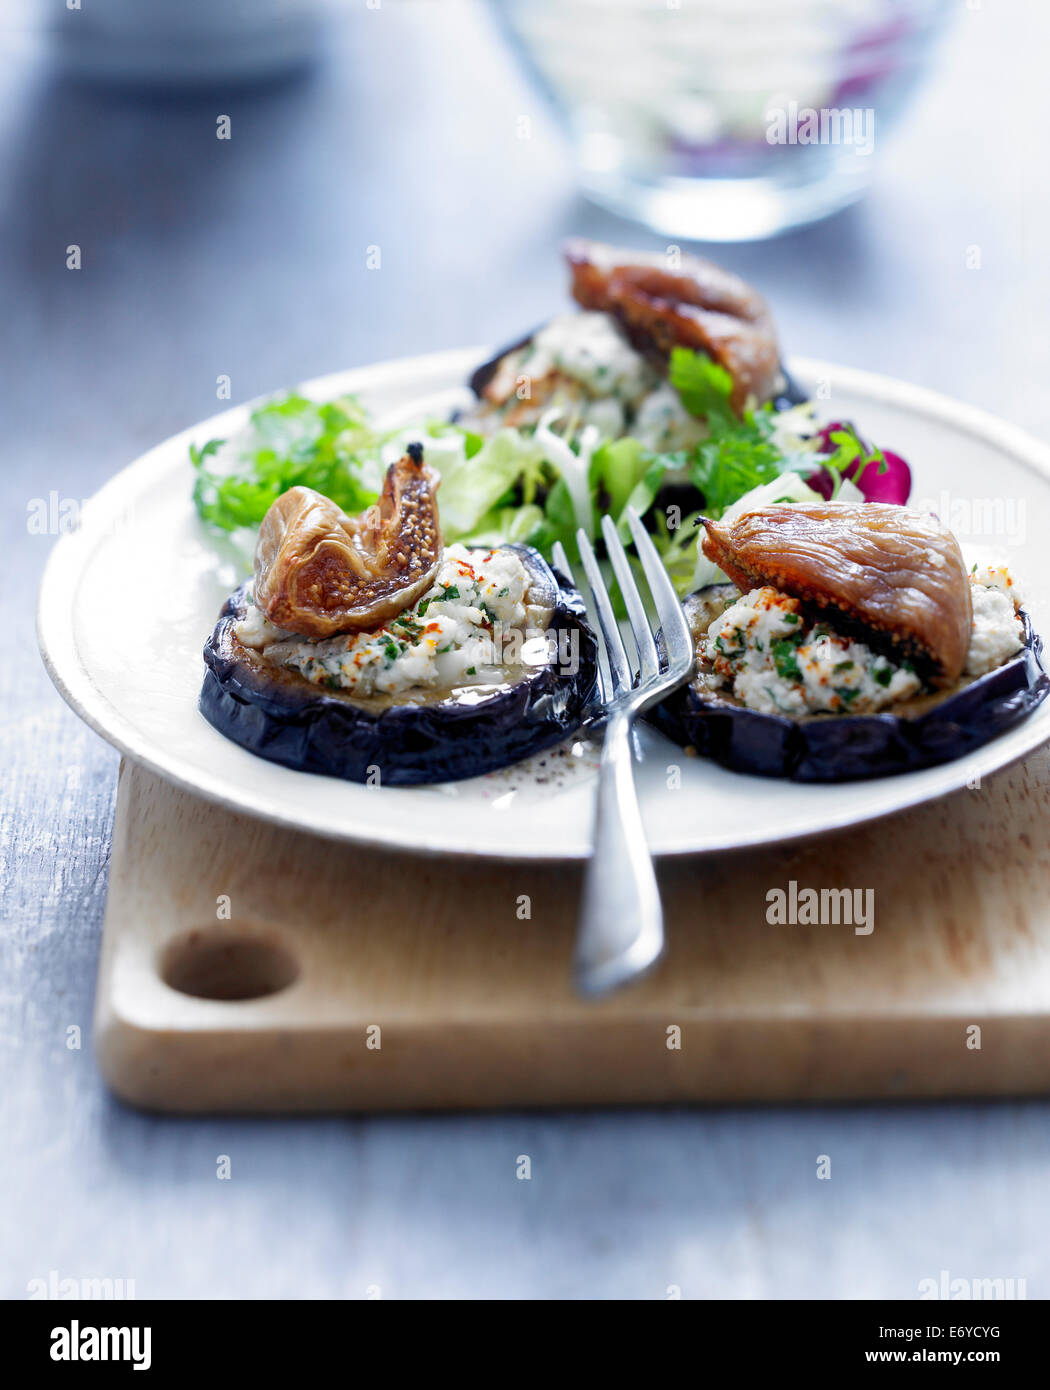 Sliced eggplants grilled with goat's cheese and fresh figs Stock Photo